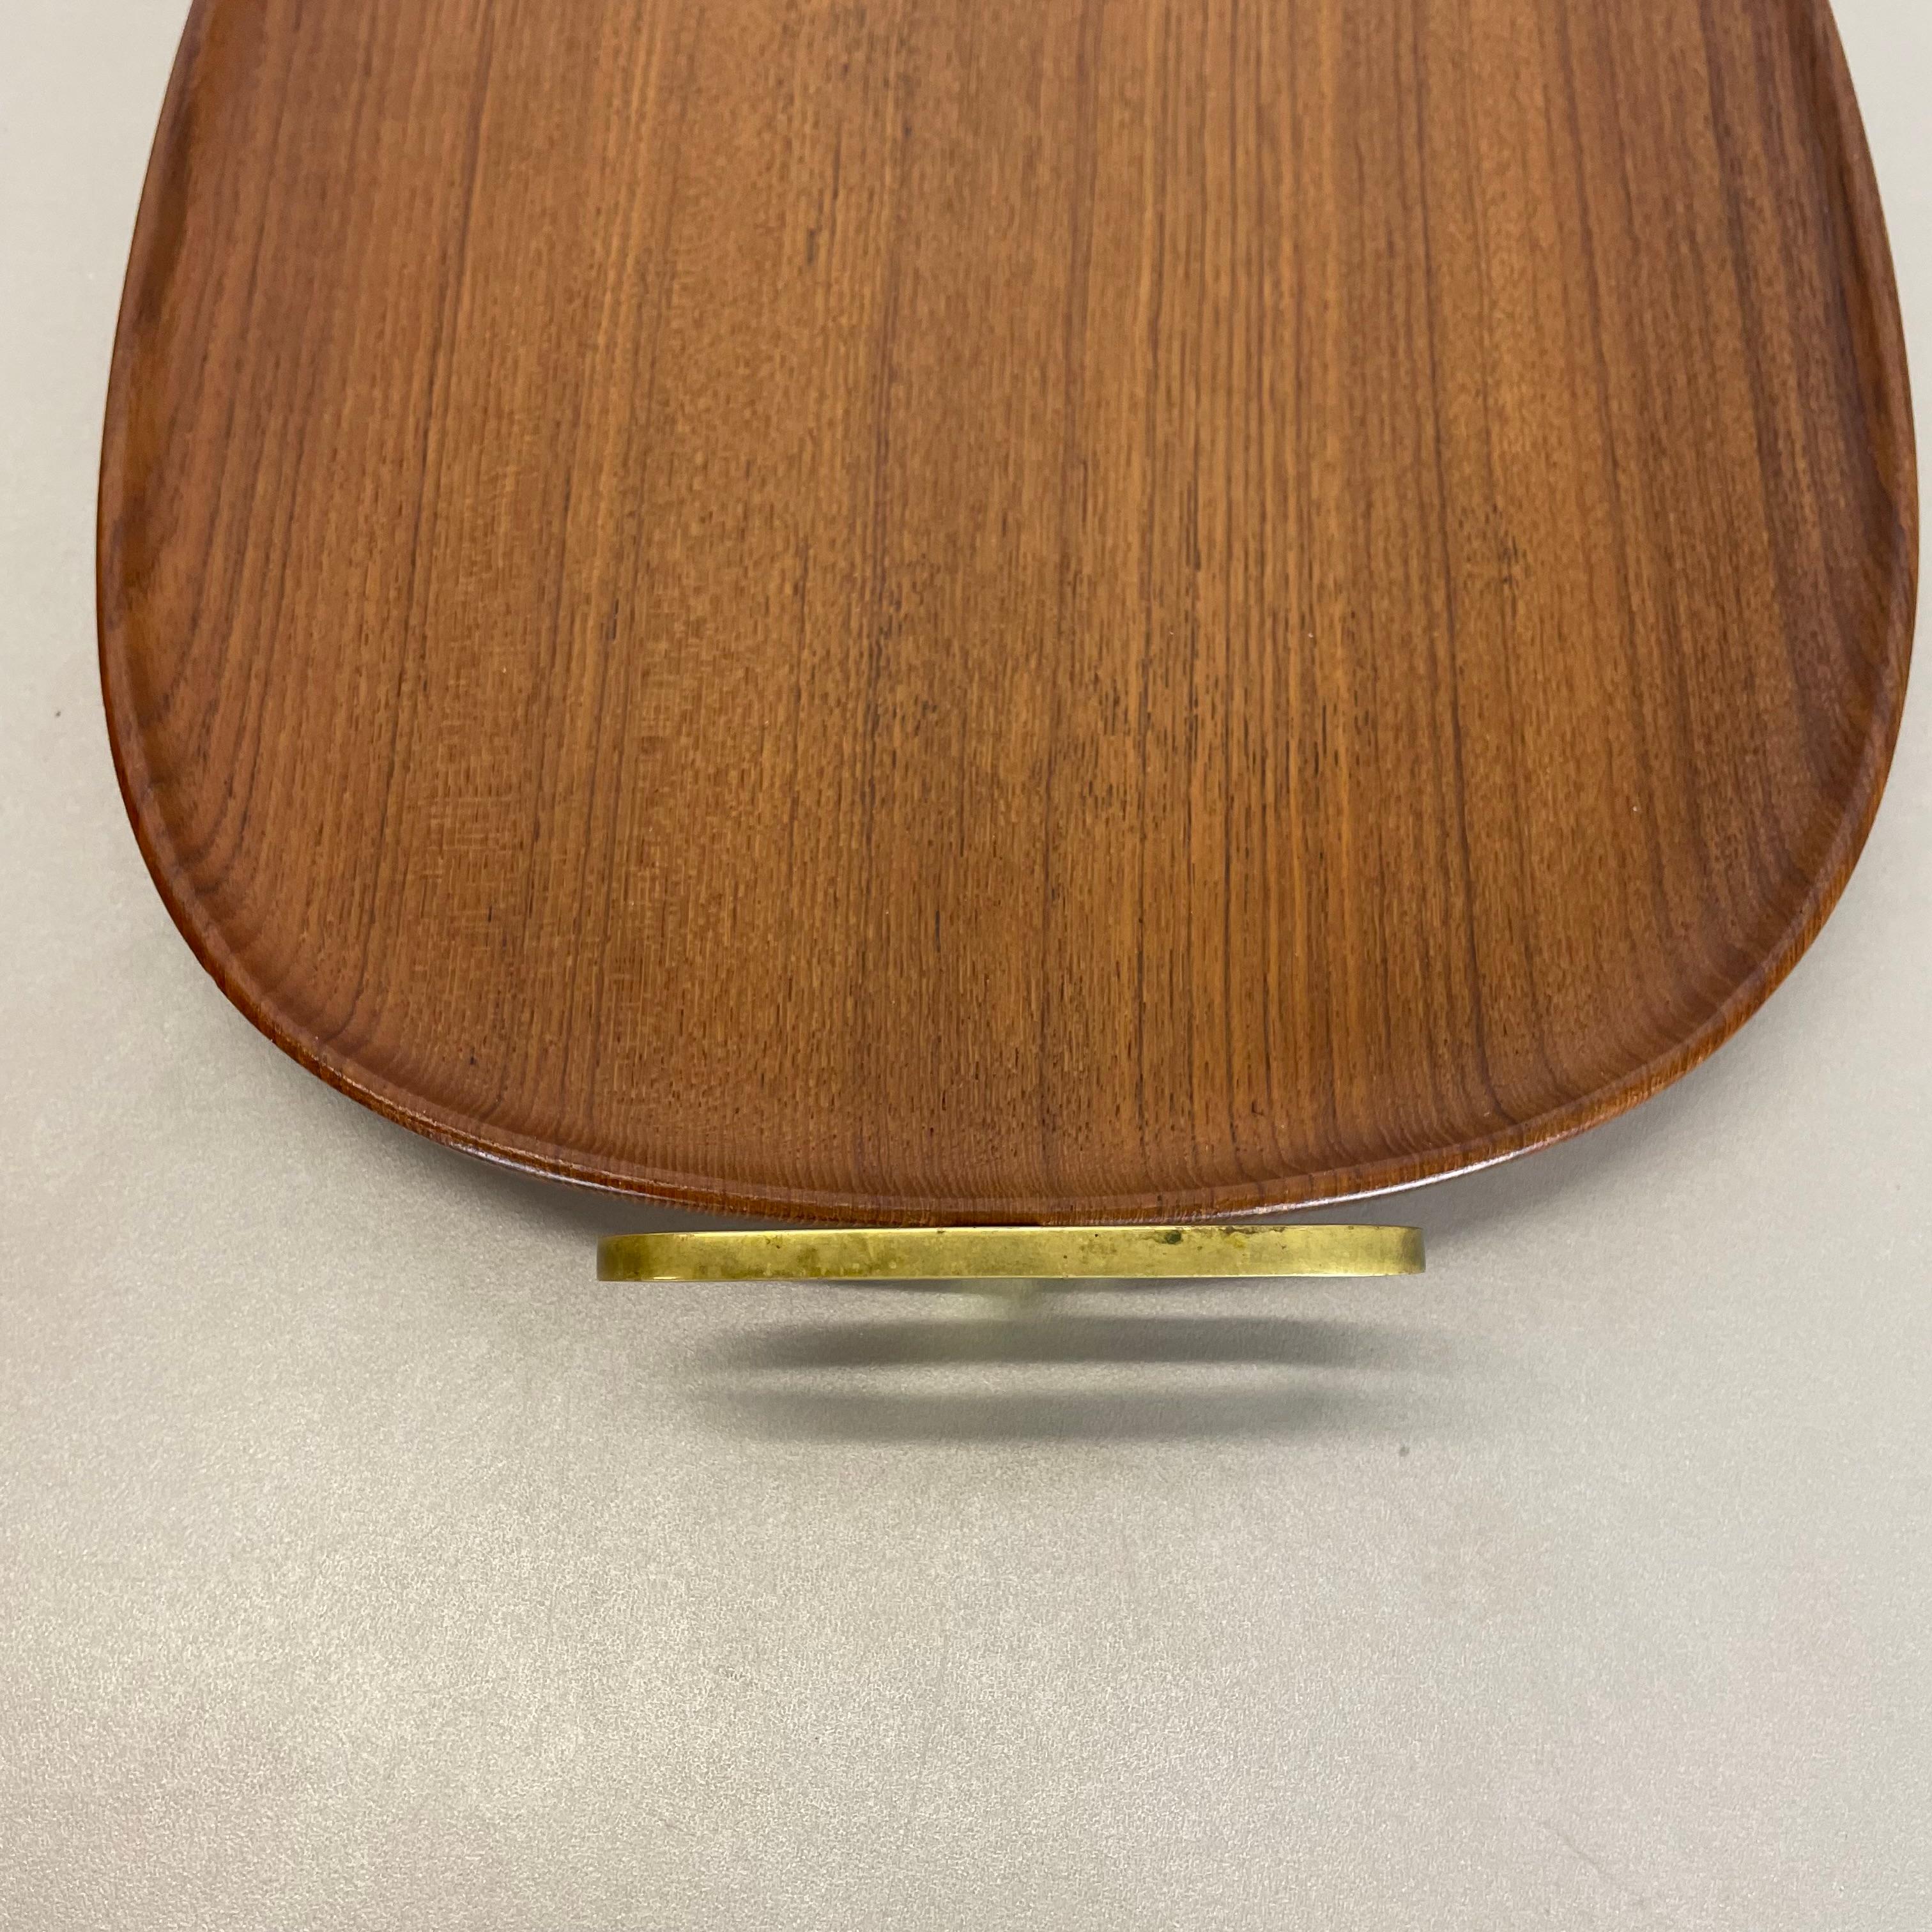 Large TEAK Tray Plate Element with Brass Handle by Carl Auböck, Austria, 1950s For Sale 8